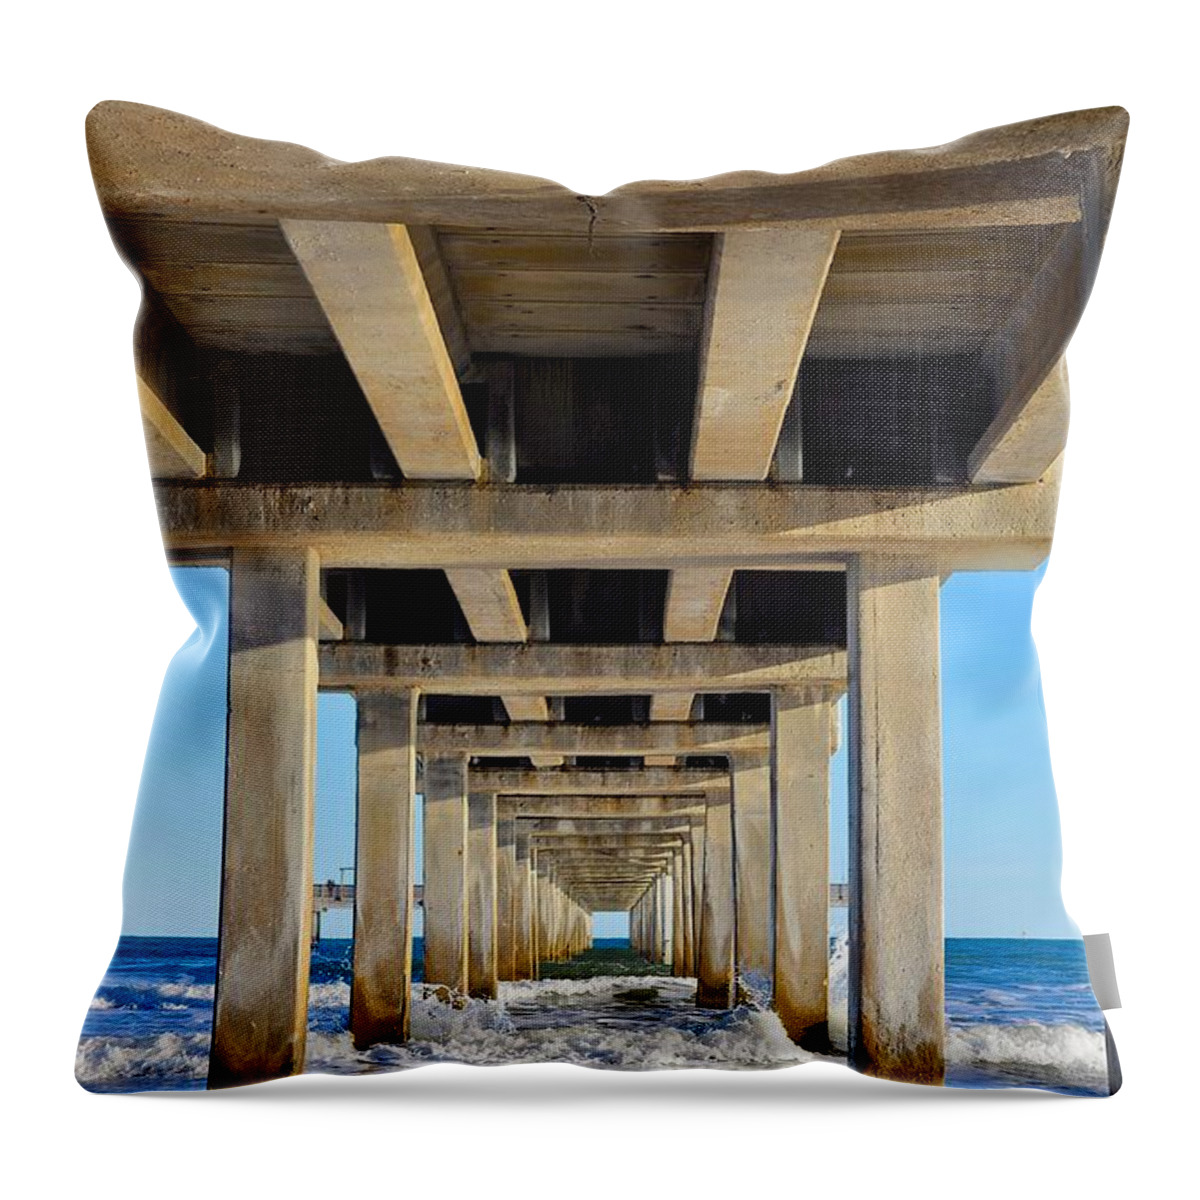 Beach Landscape Throw Pillow featuring the photograph Under The Pier by Kristina Deane